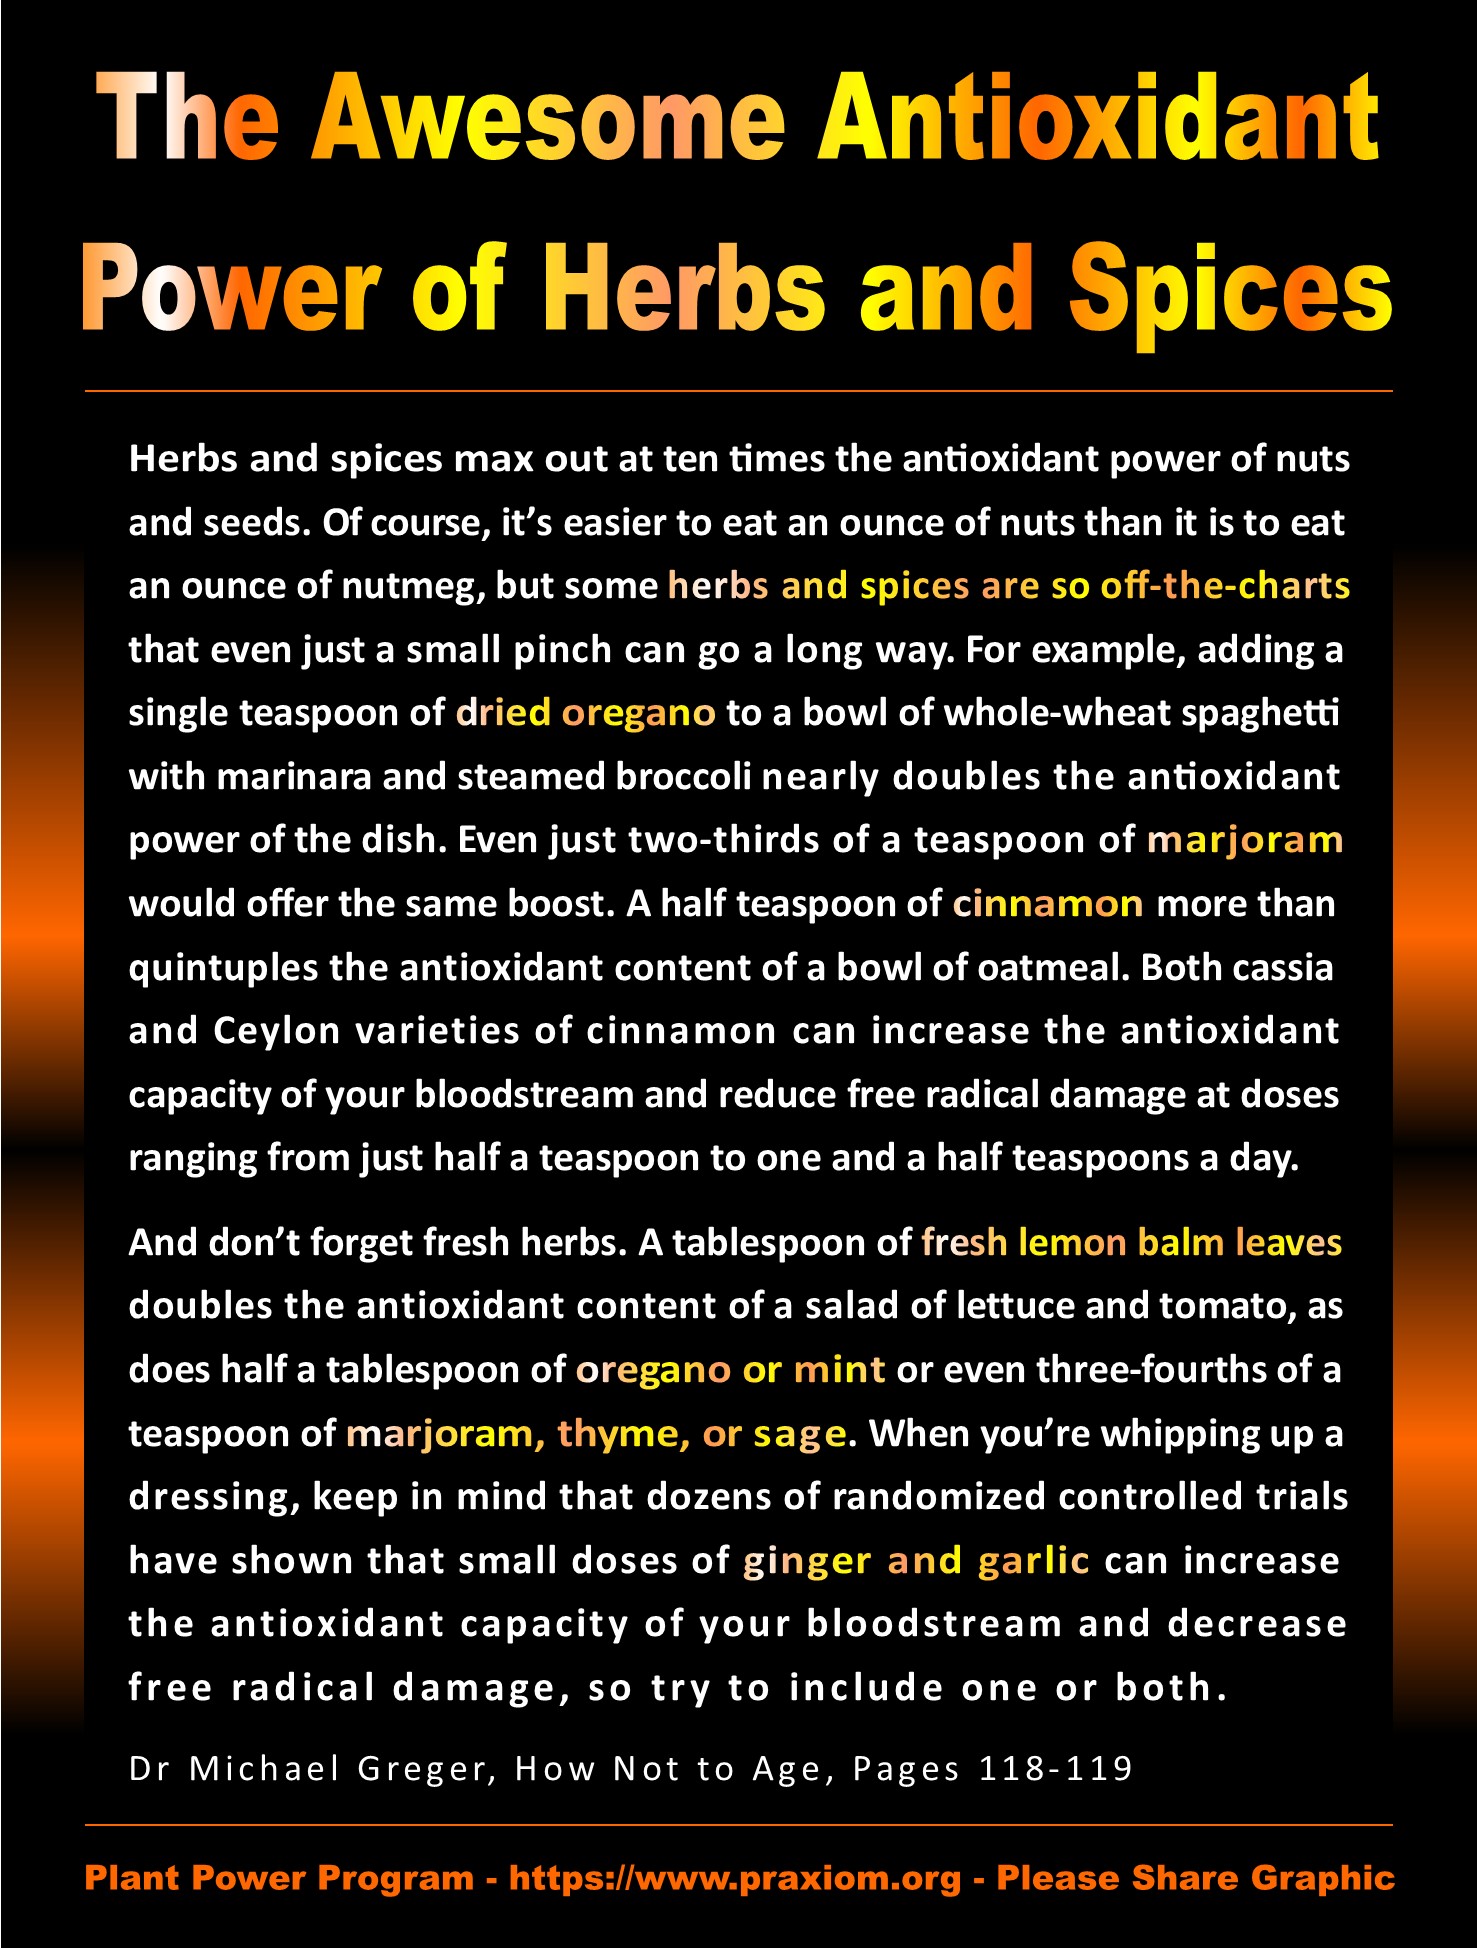 Antioxidant Power of Herbs and Spices - Dr Michael Greger